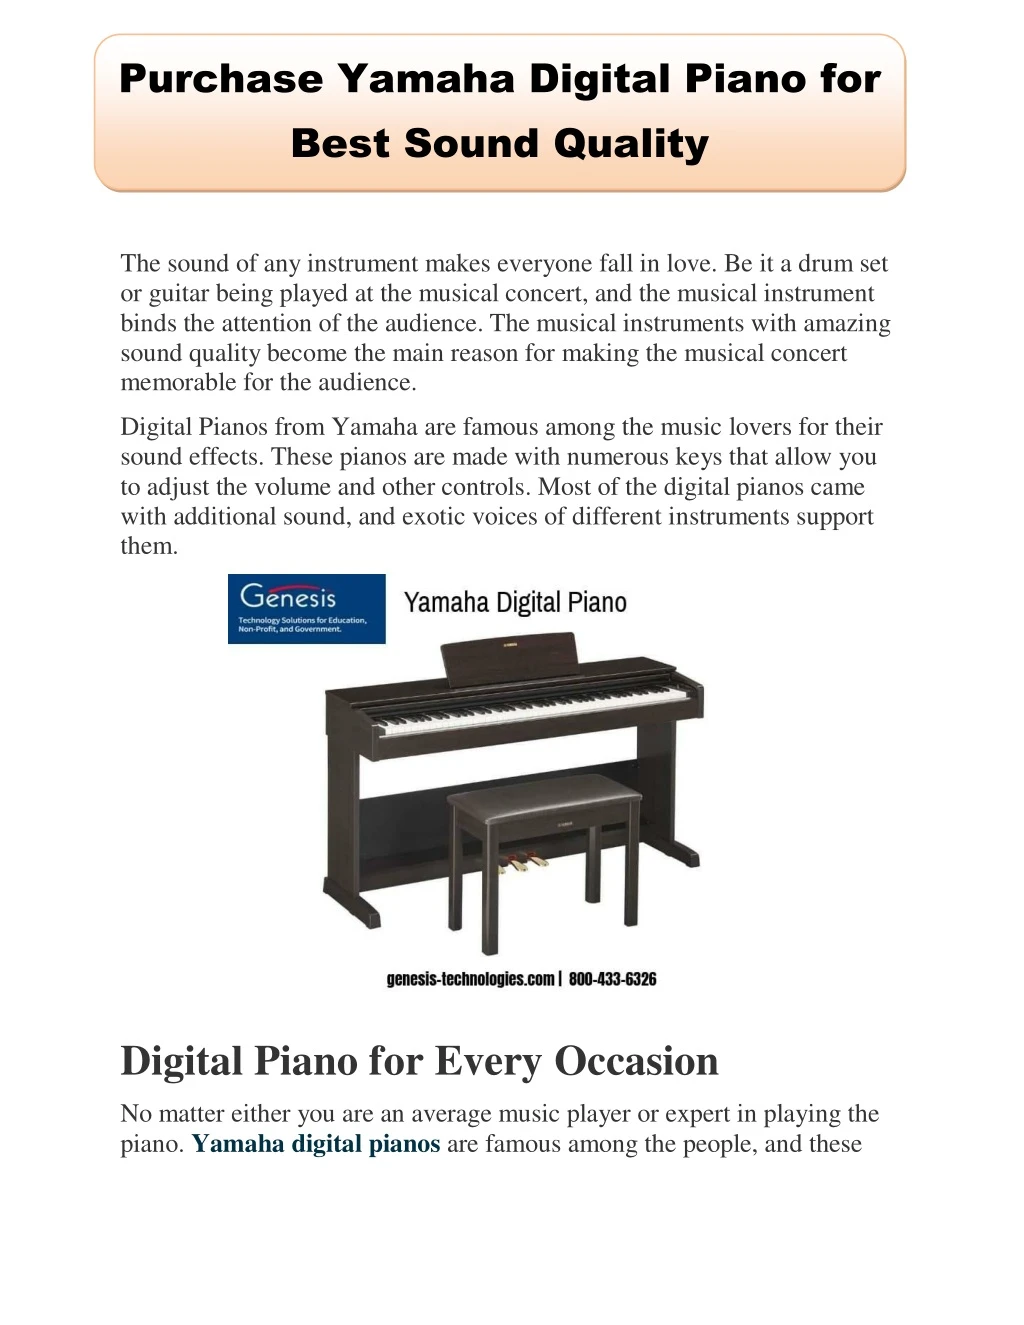 purchase yamaha digital piano for best sound